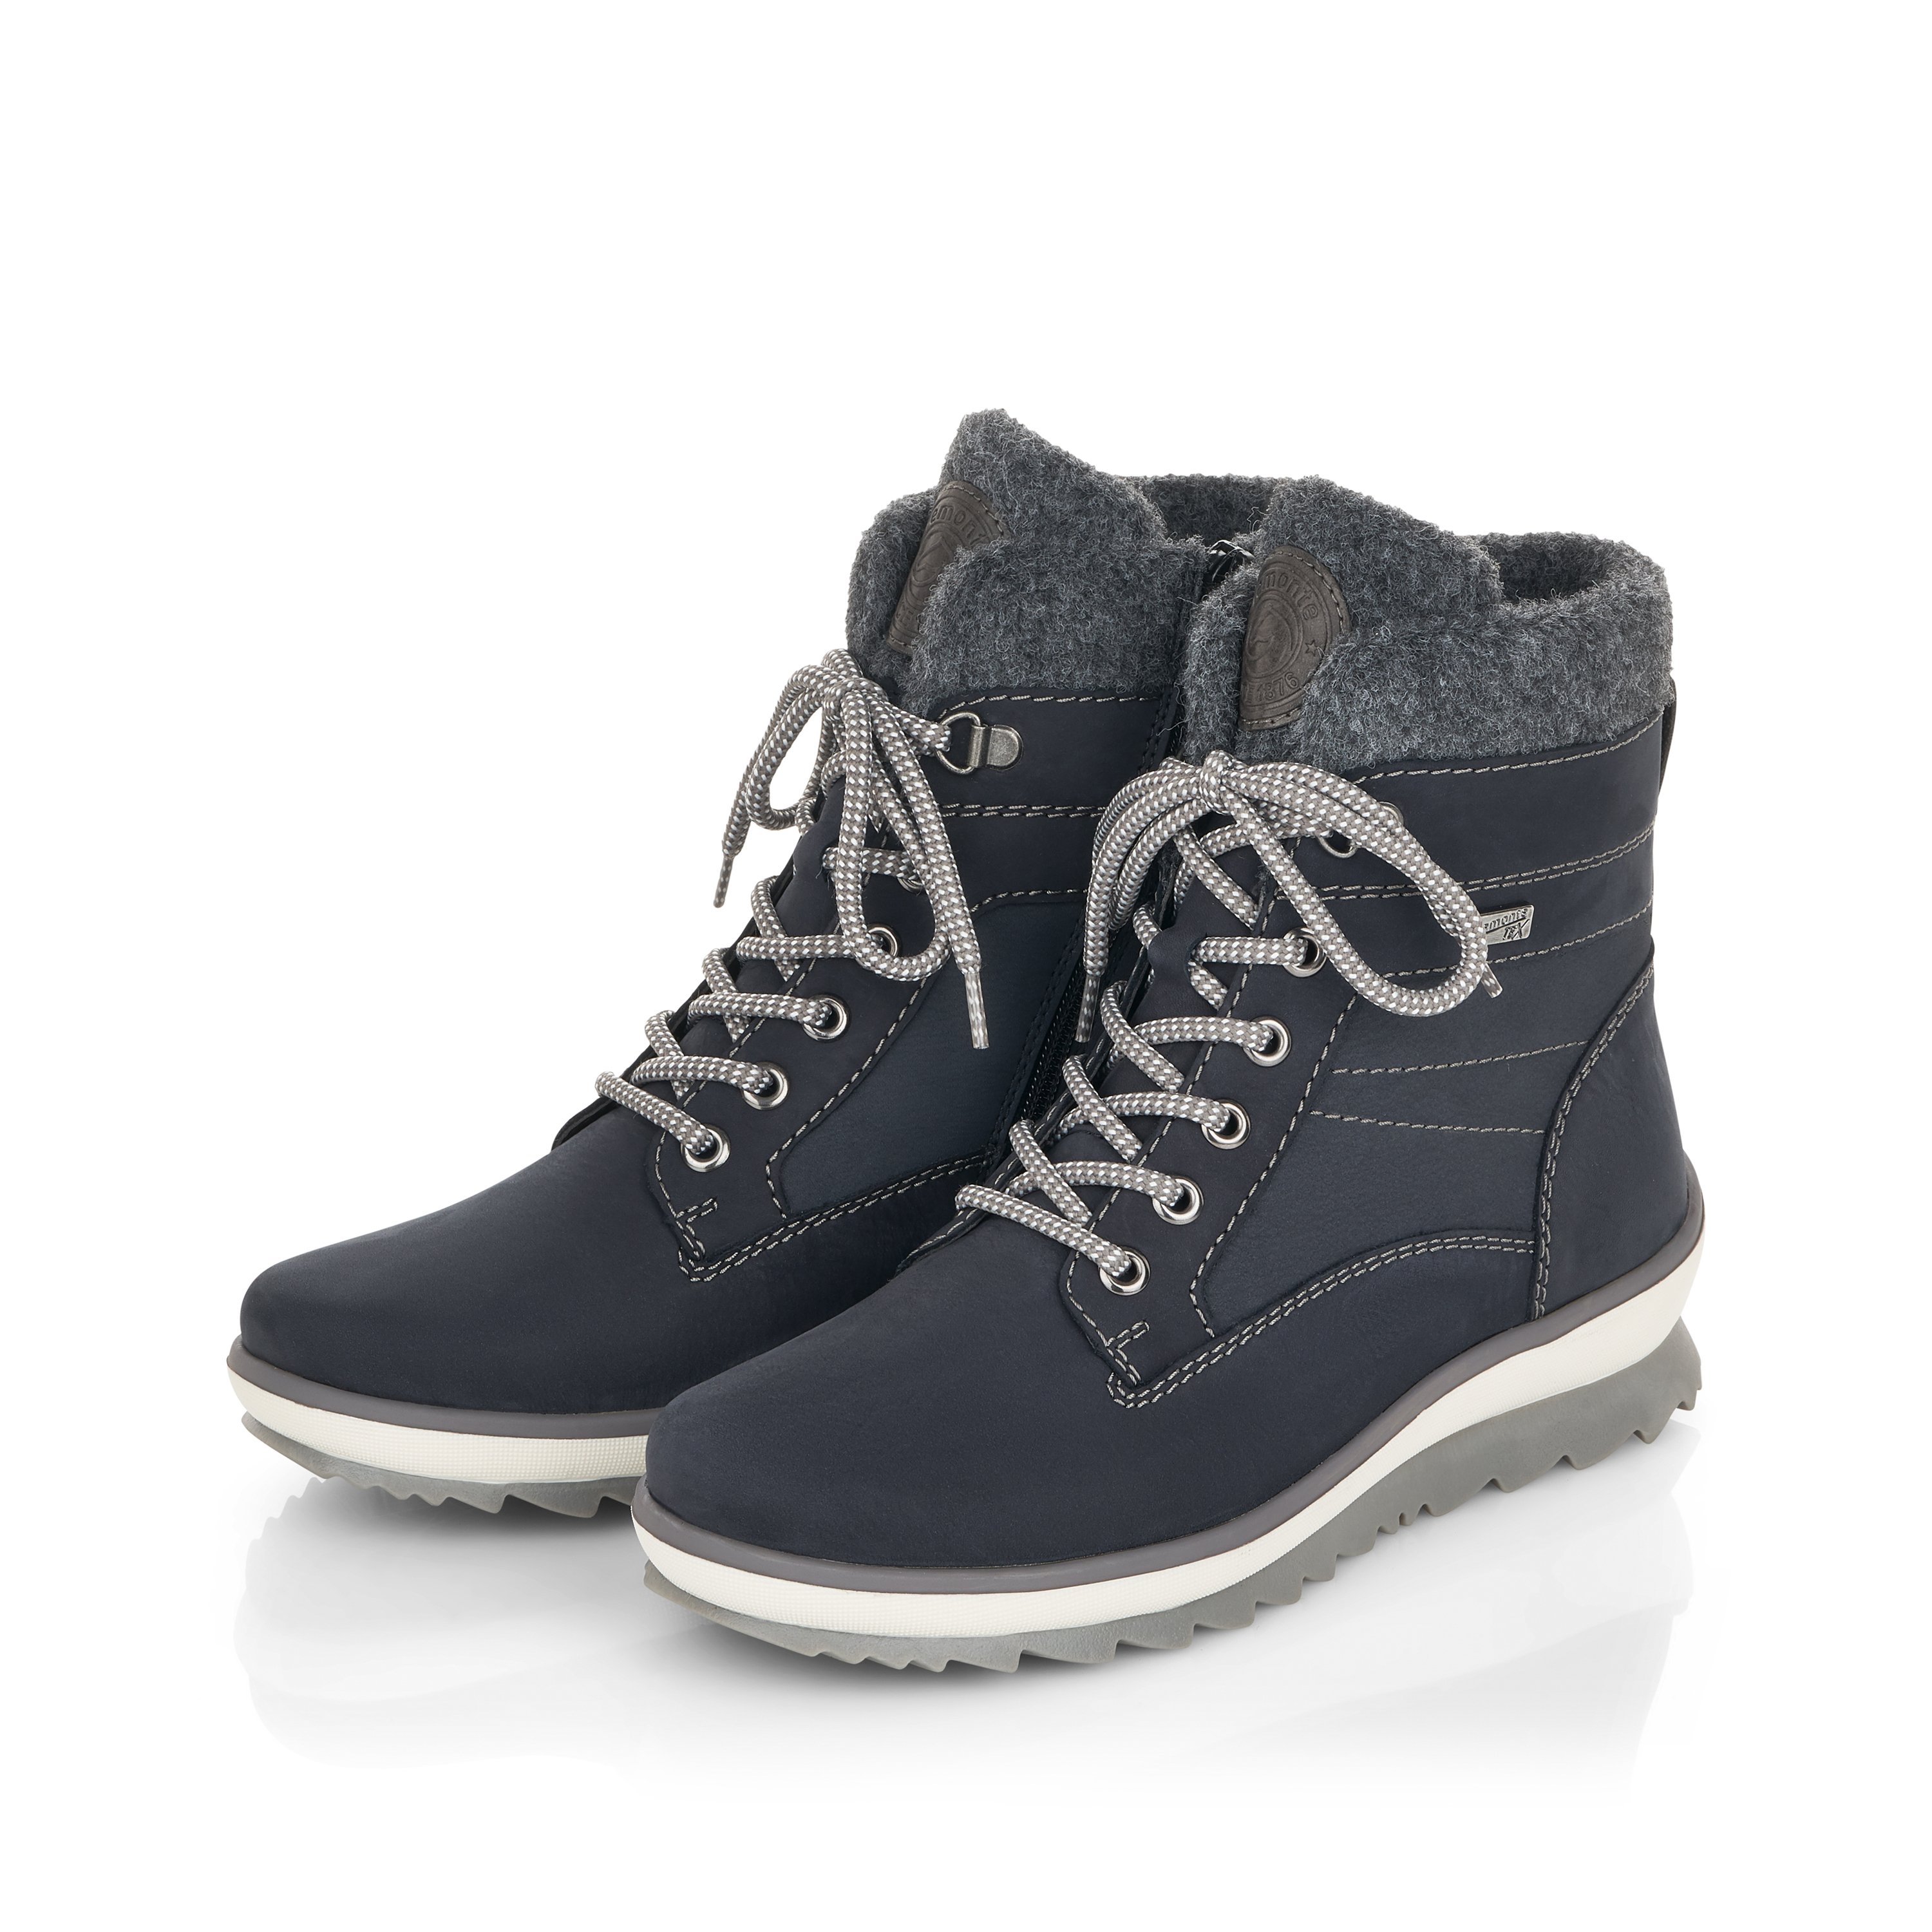 Dark blue remonte women´s lace-up boots R8477-14 with cushioning profile sole. Shoe laterally